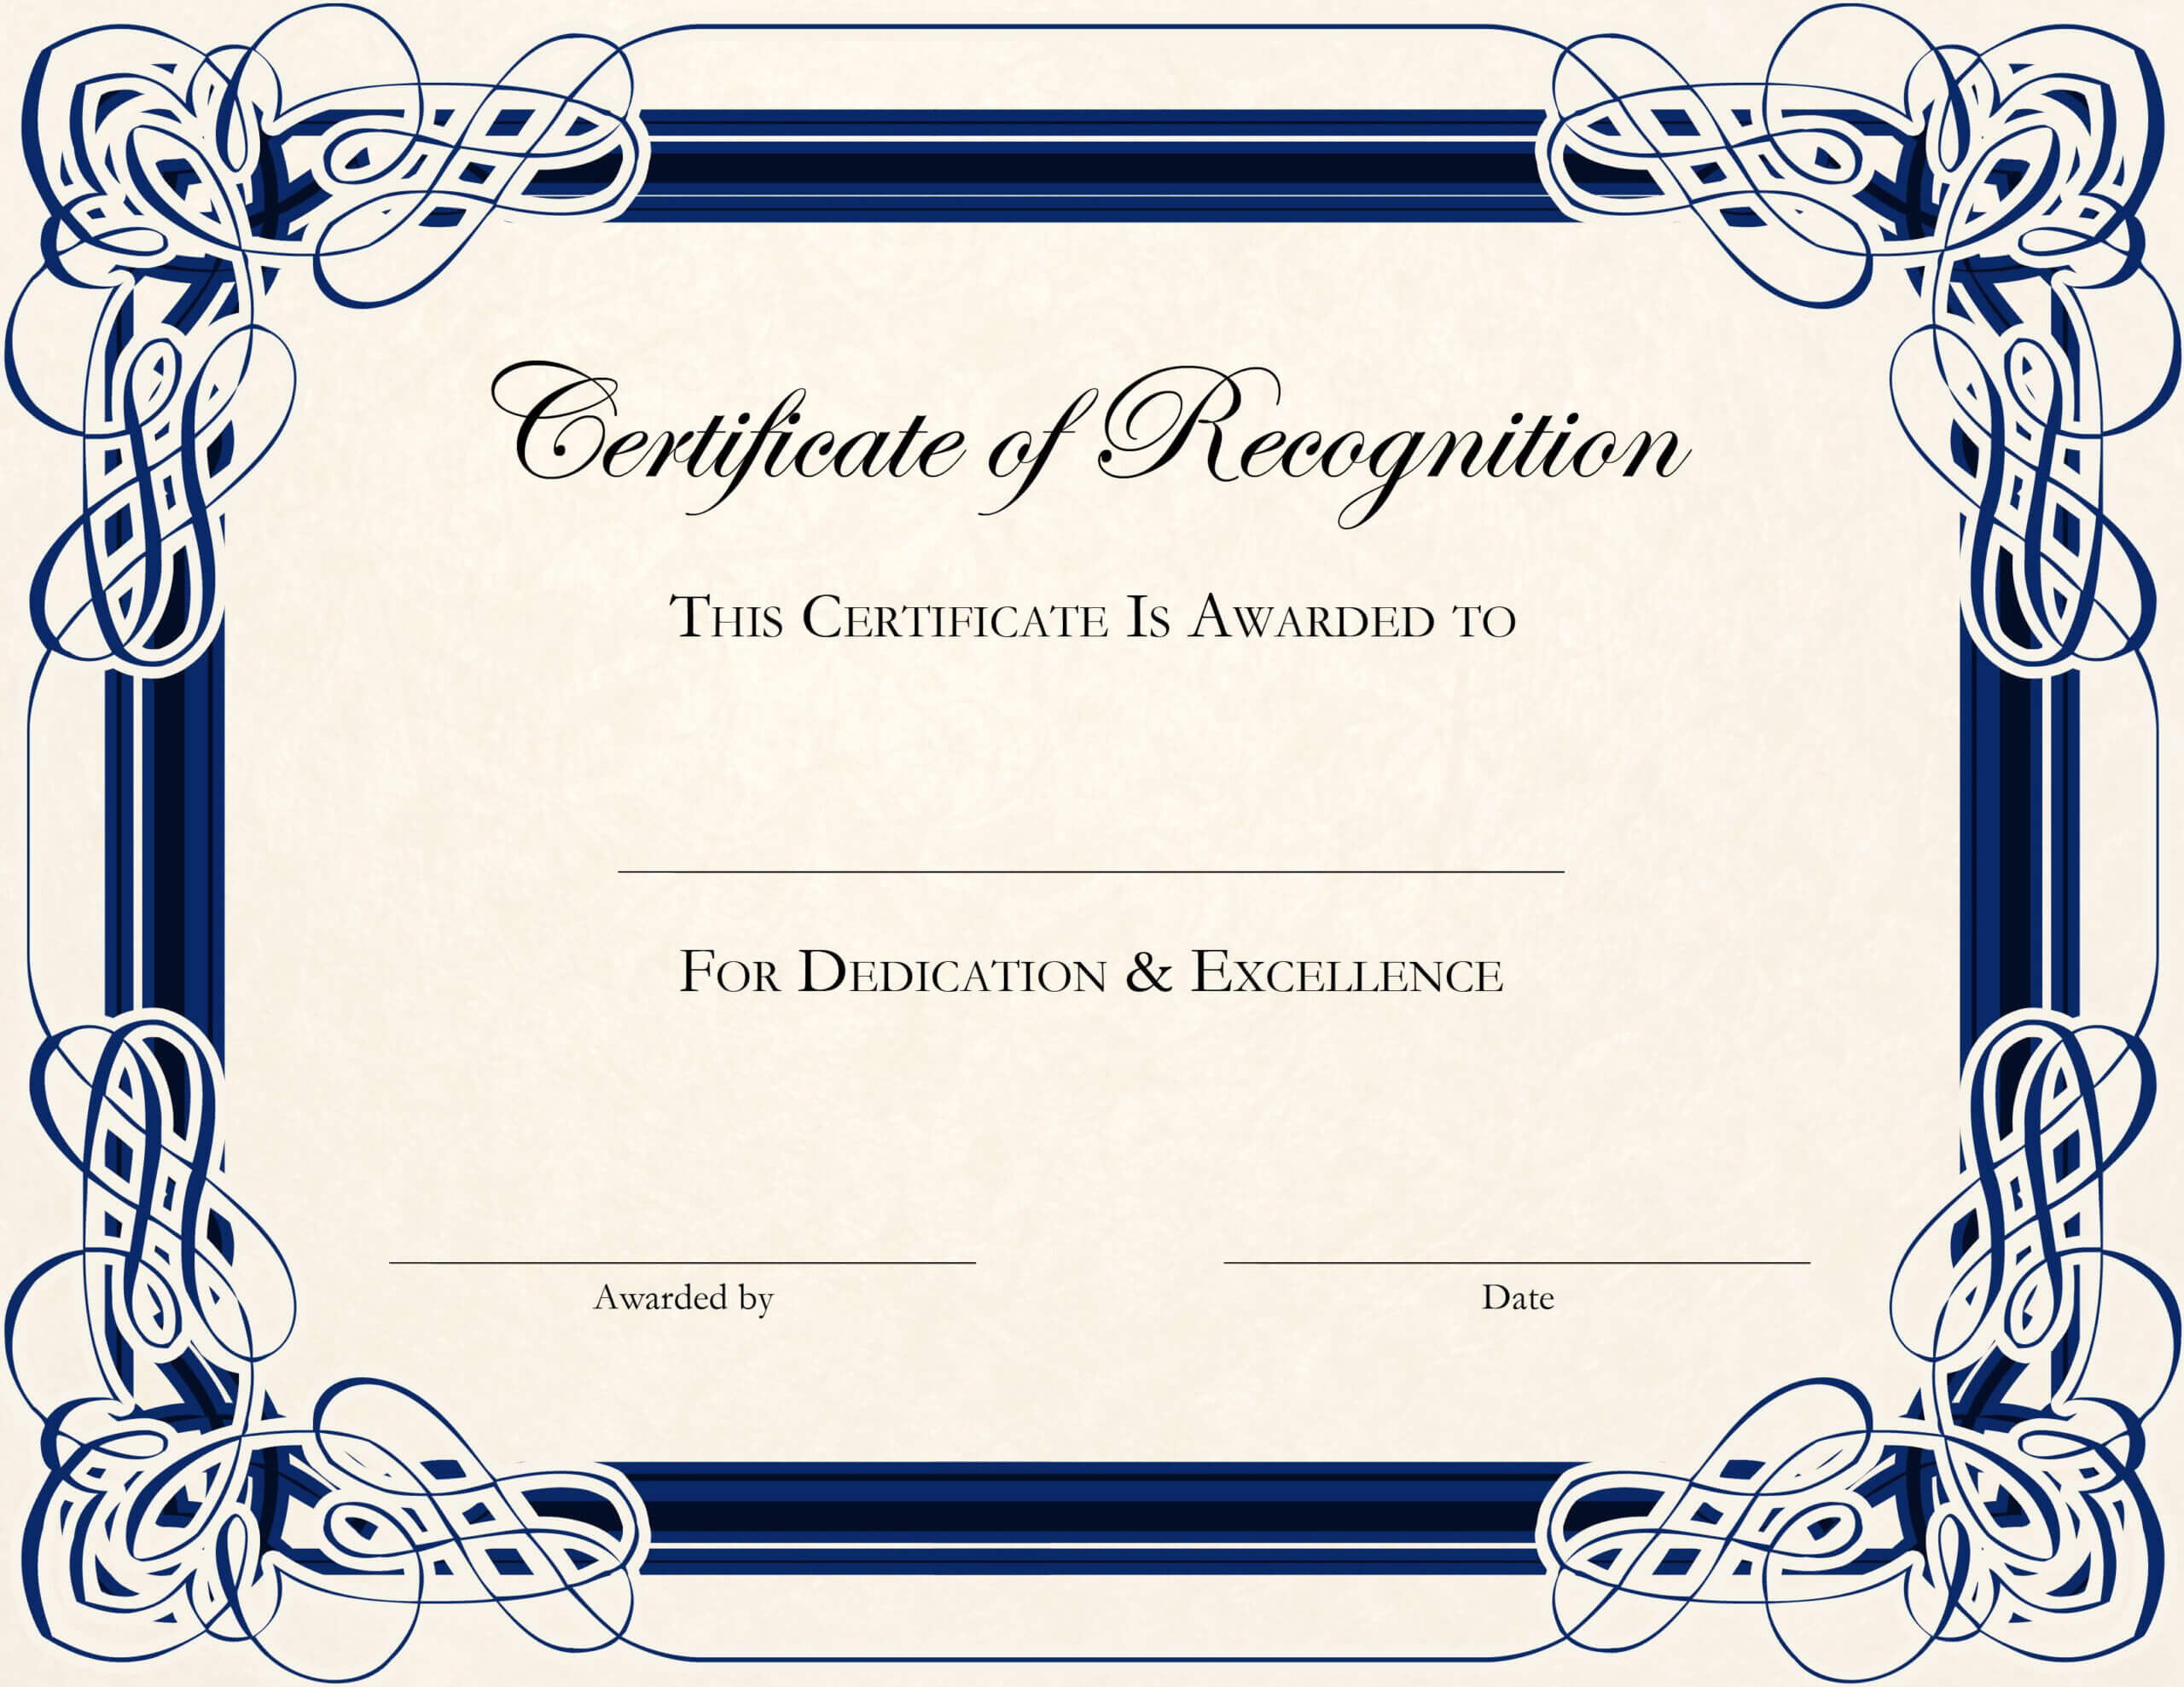 Certificate Template Designs Recognition Docs | Certificate Intended For Template For Certificate Of Appreciation In Microsoft Word